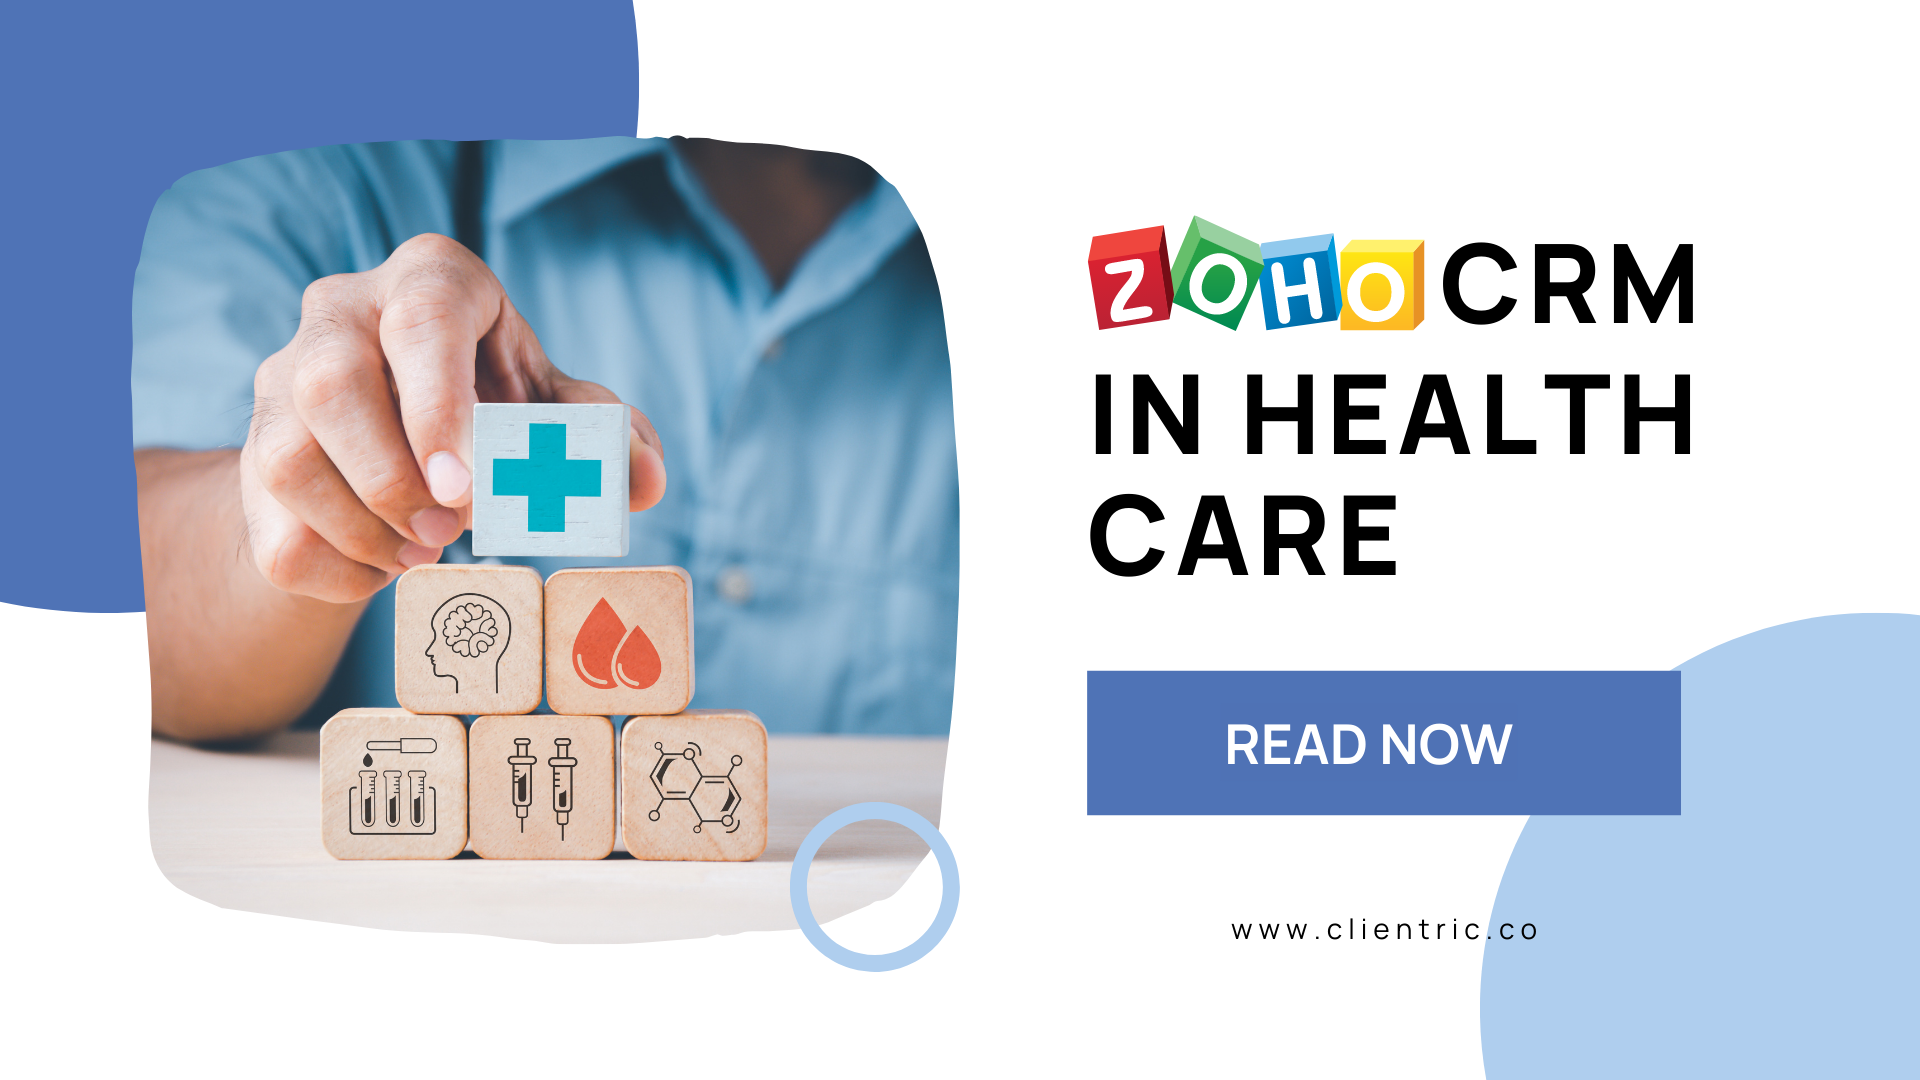 Benefits of Zoho CRM in Health Care!